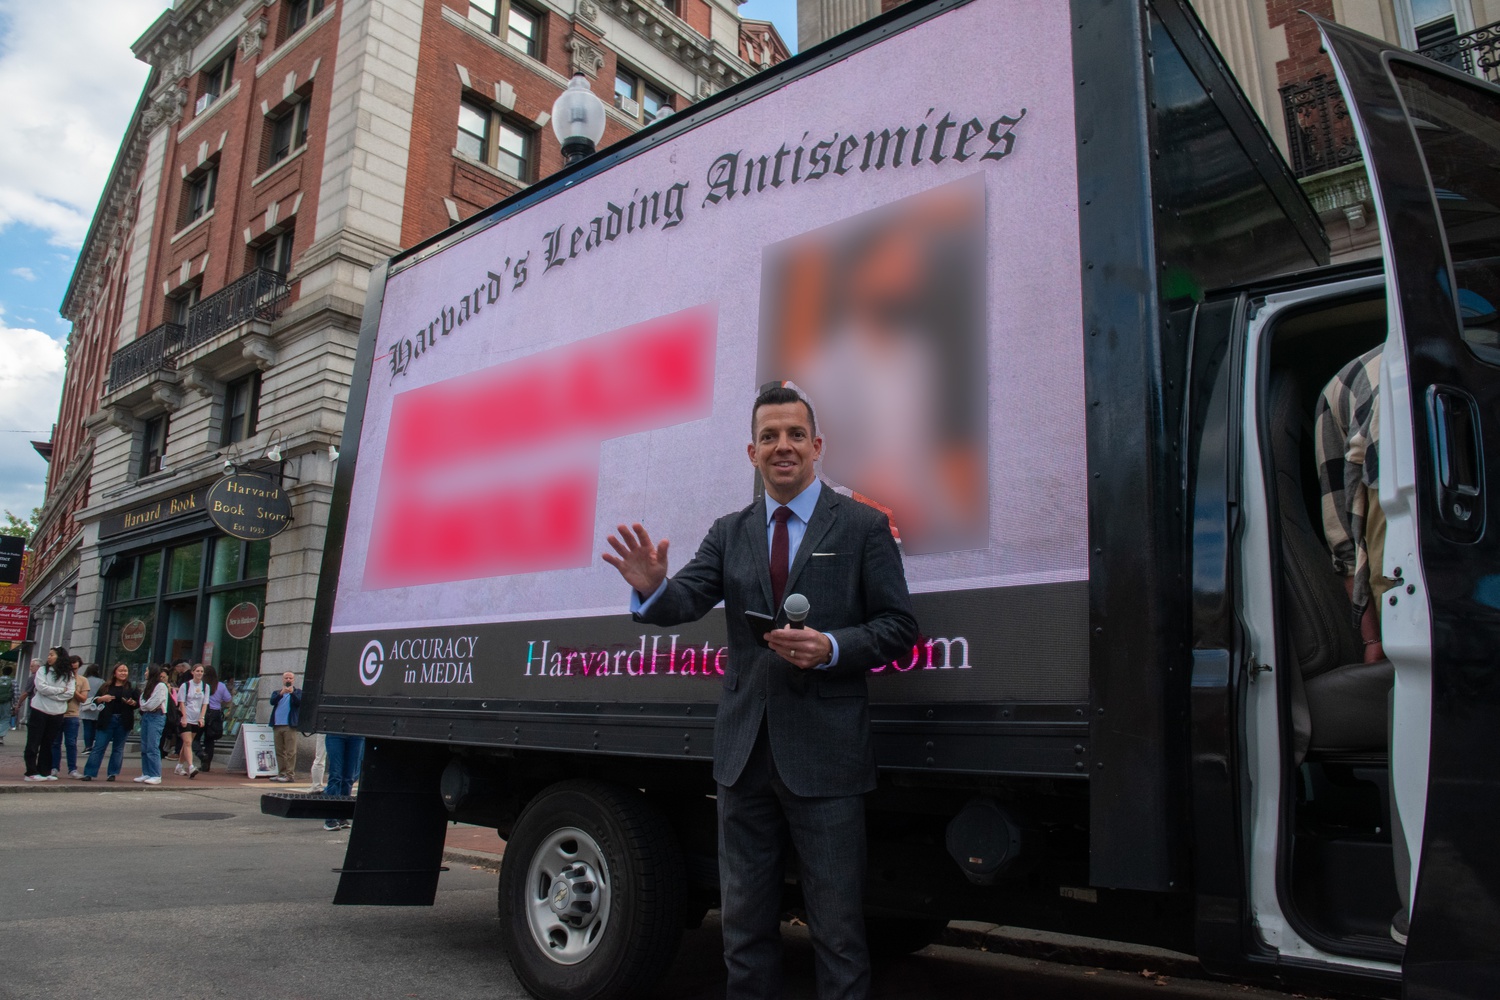 Adam Guillette, the CEO of conservative group Accuracy in Media, stands in front of the truck. The Crimson blurred parts of this photograph to avoid identifying students due to retaliation concerns.